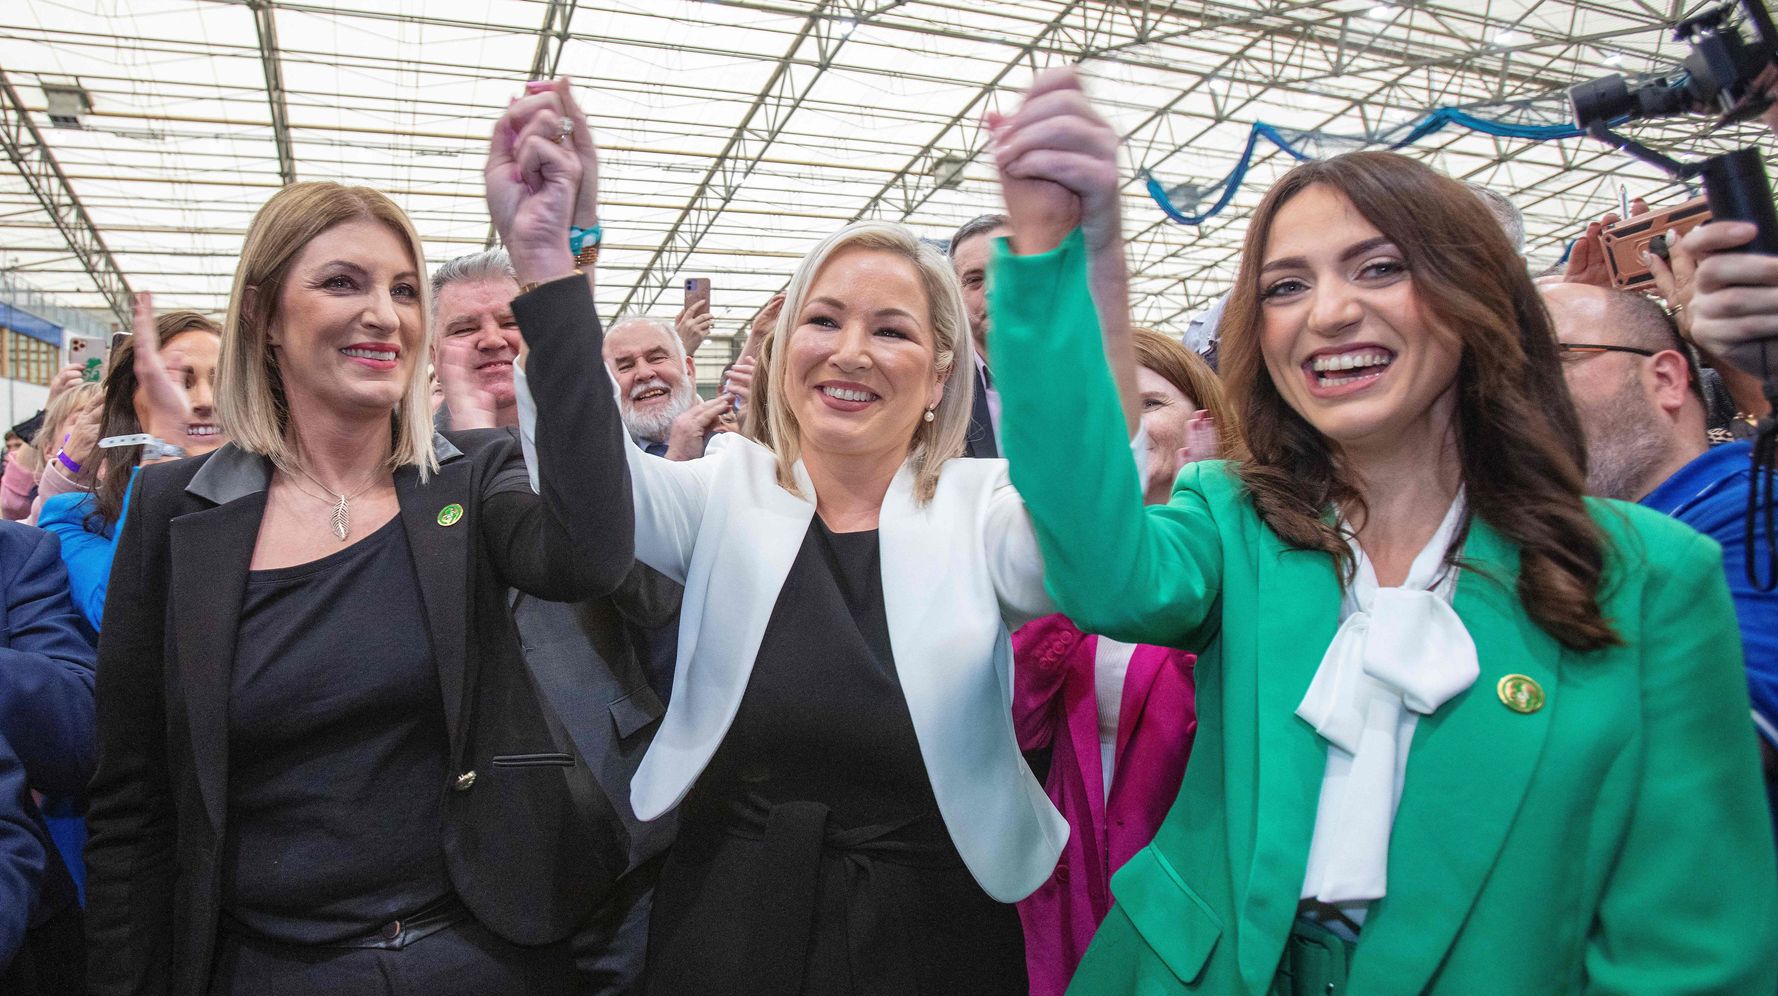 Political earthquake in Northern Ireland as Sinn Fein emerges as largest party